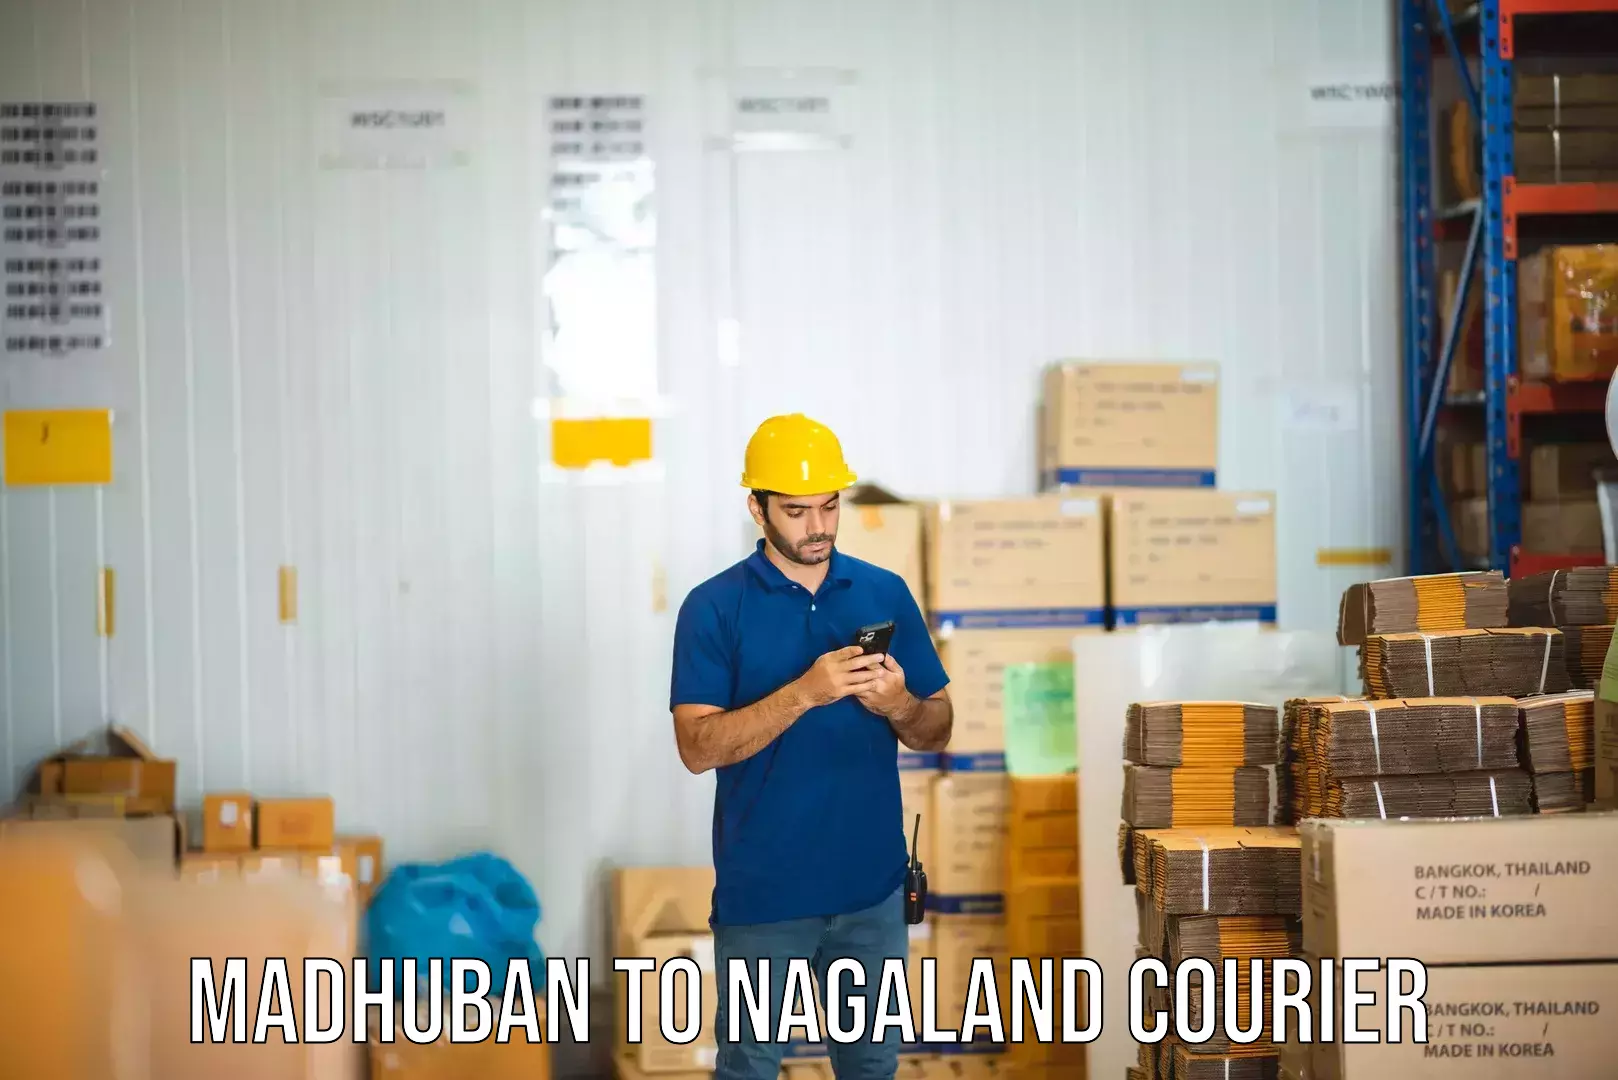 State-of-the-art courier technology Madhuban to Mon